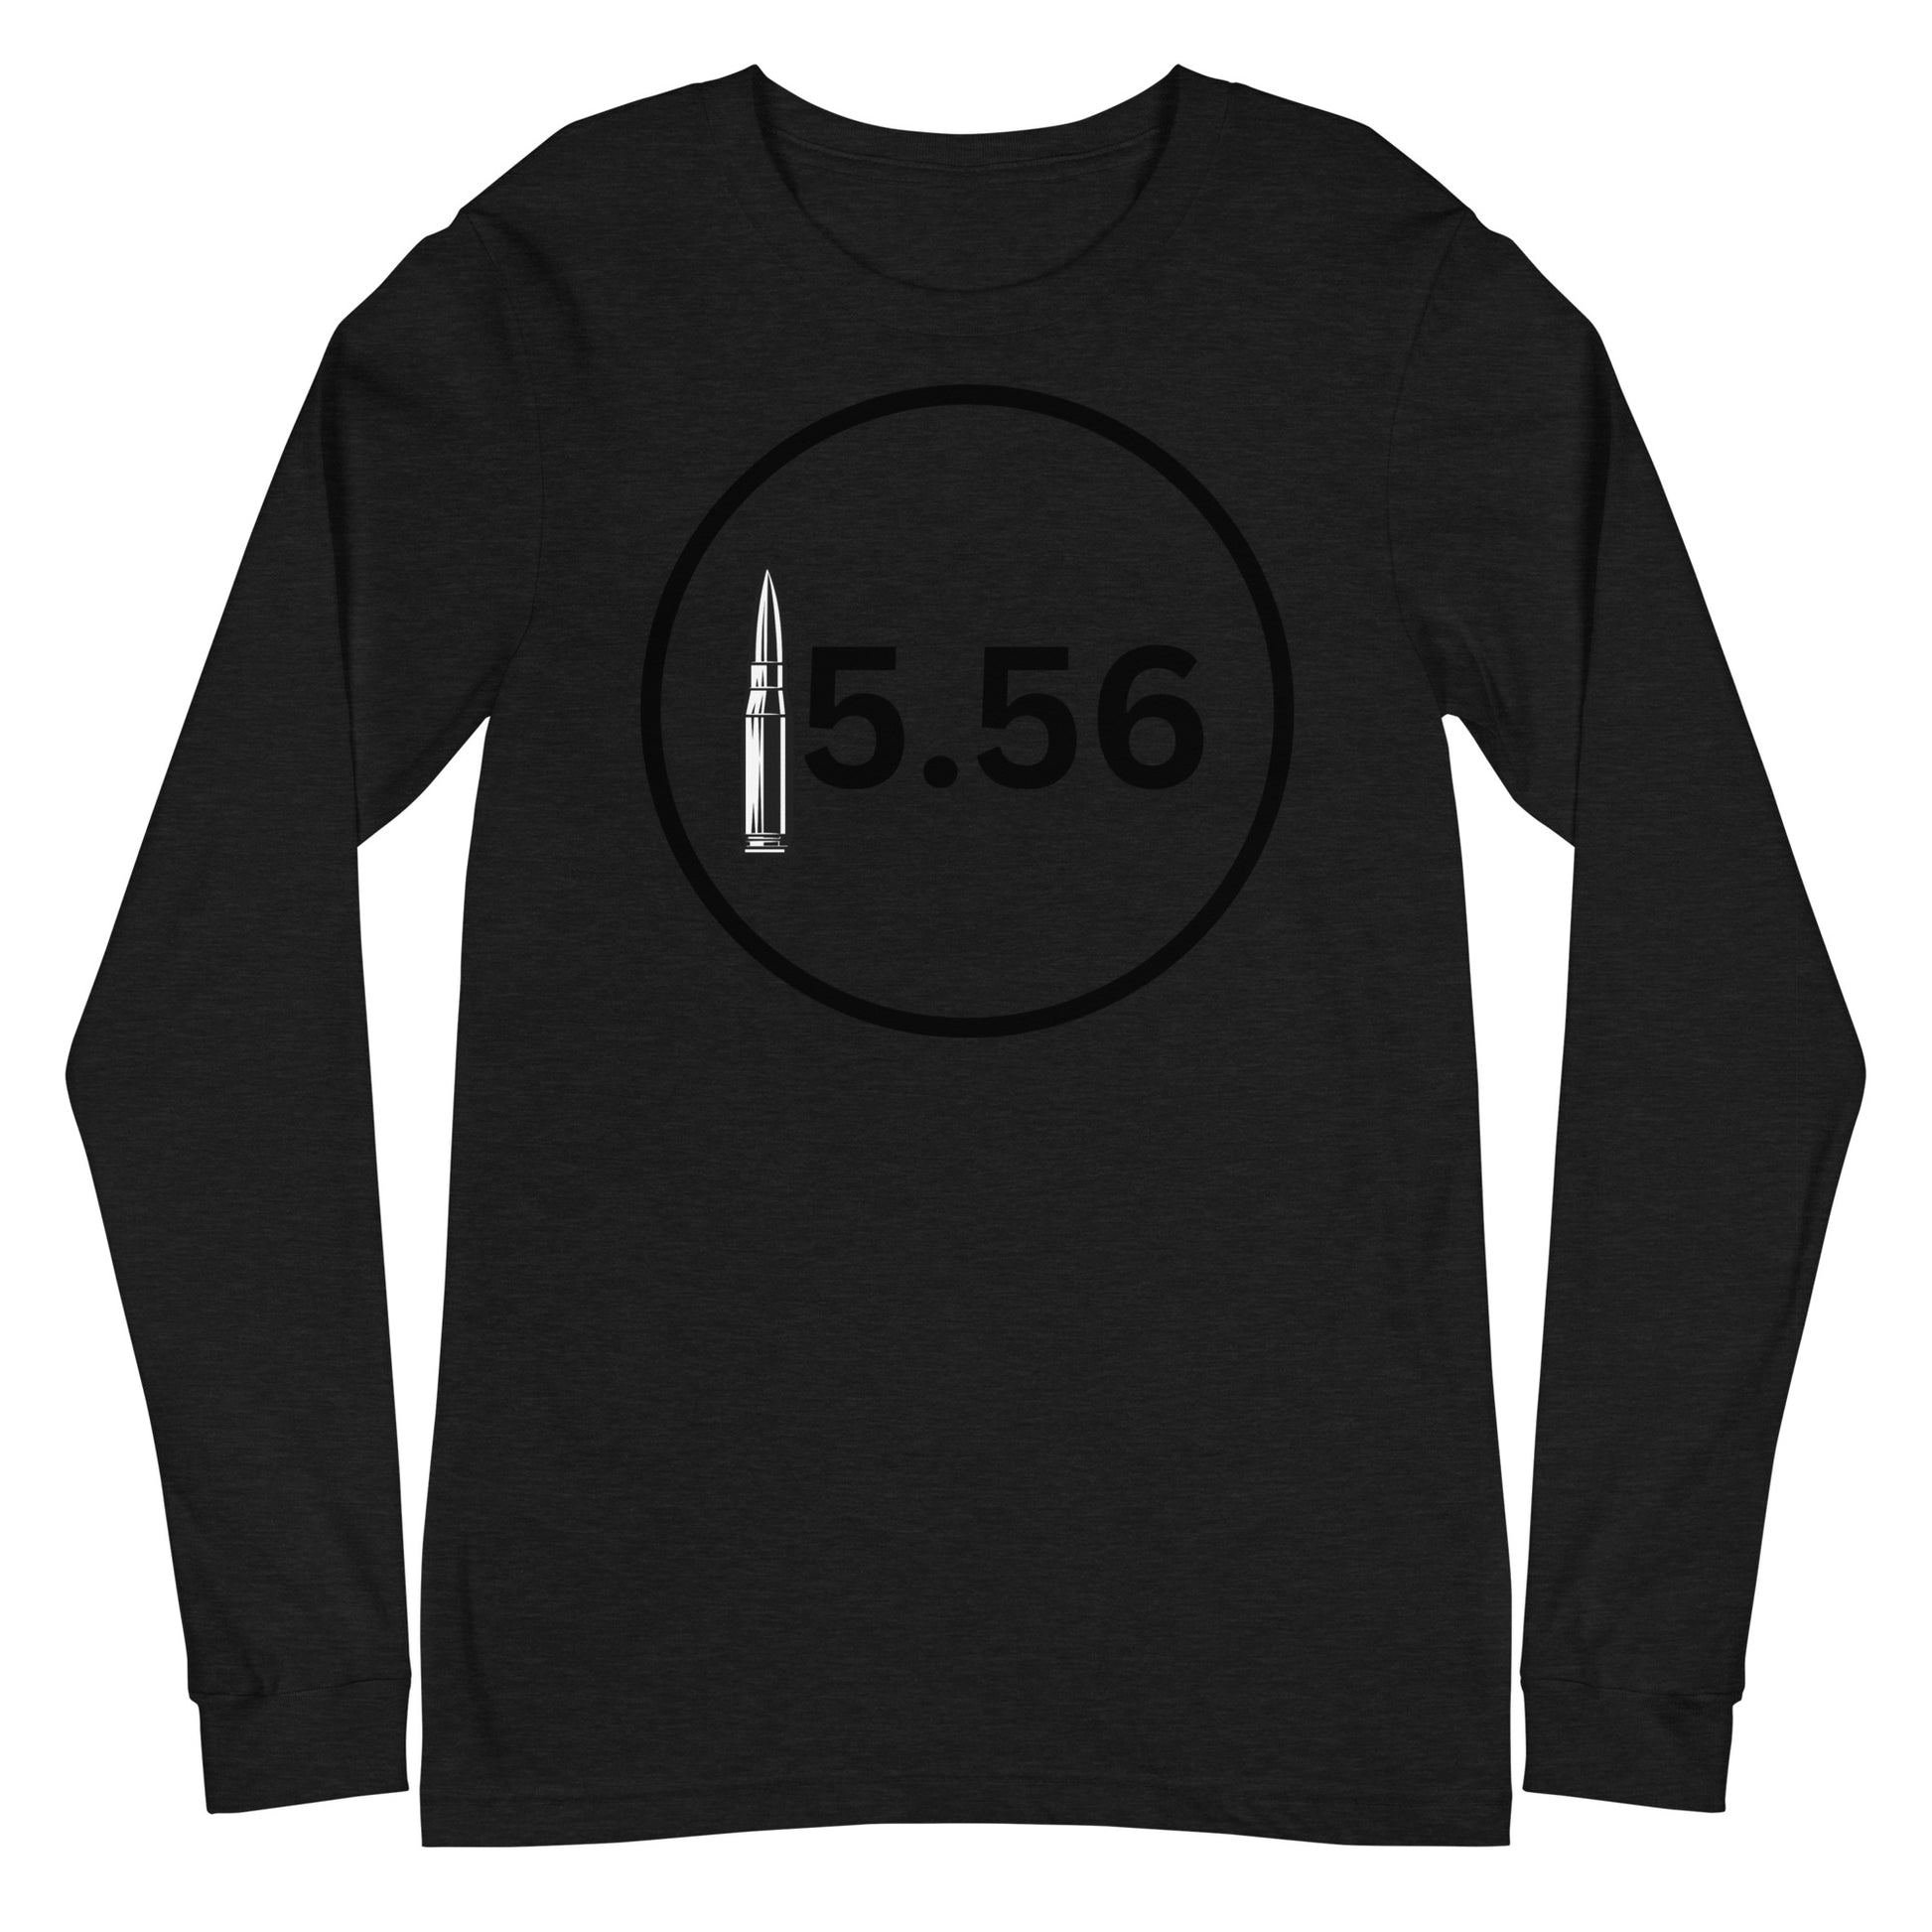 "Patriotic 5.56 Black Long Sleeve T-shirt featuring the caliber '5.56' and American flag design."